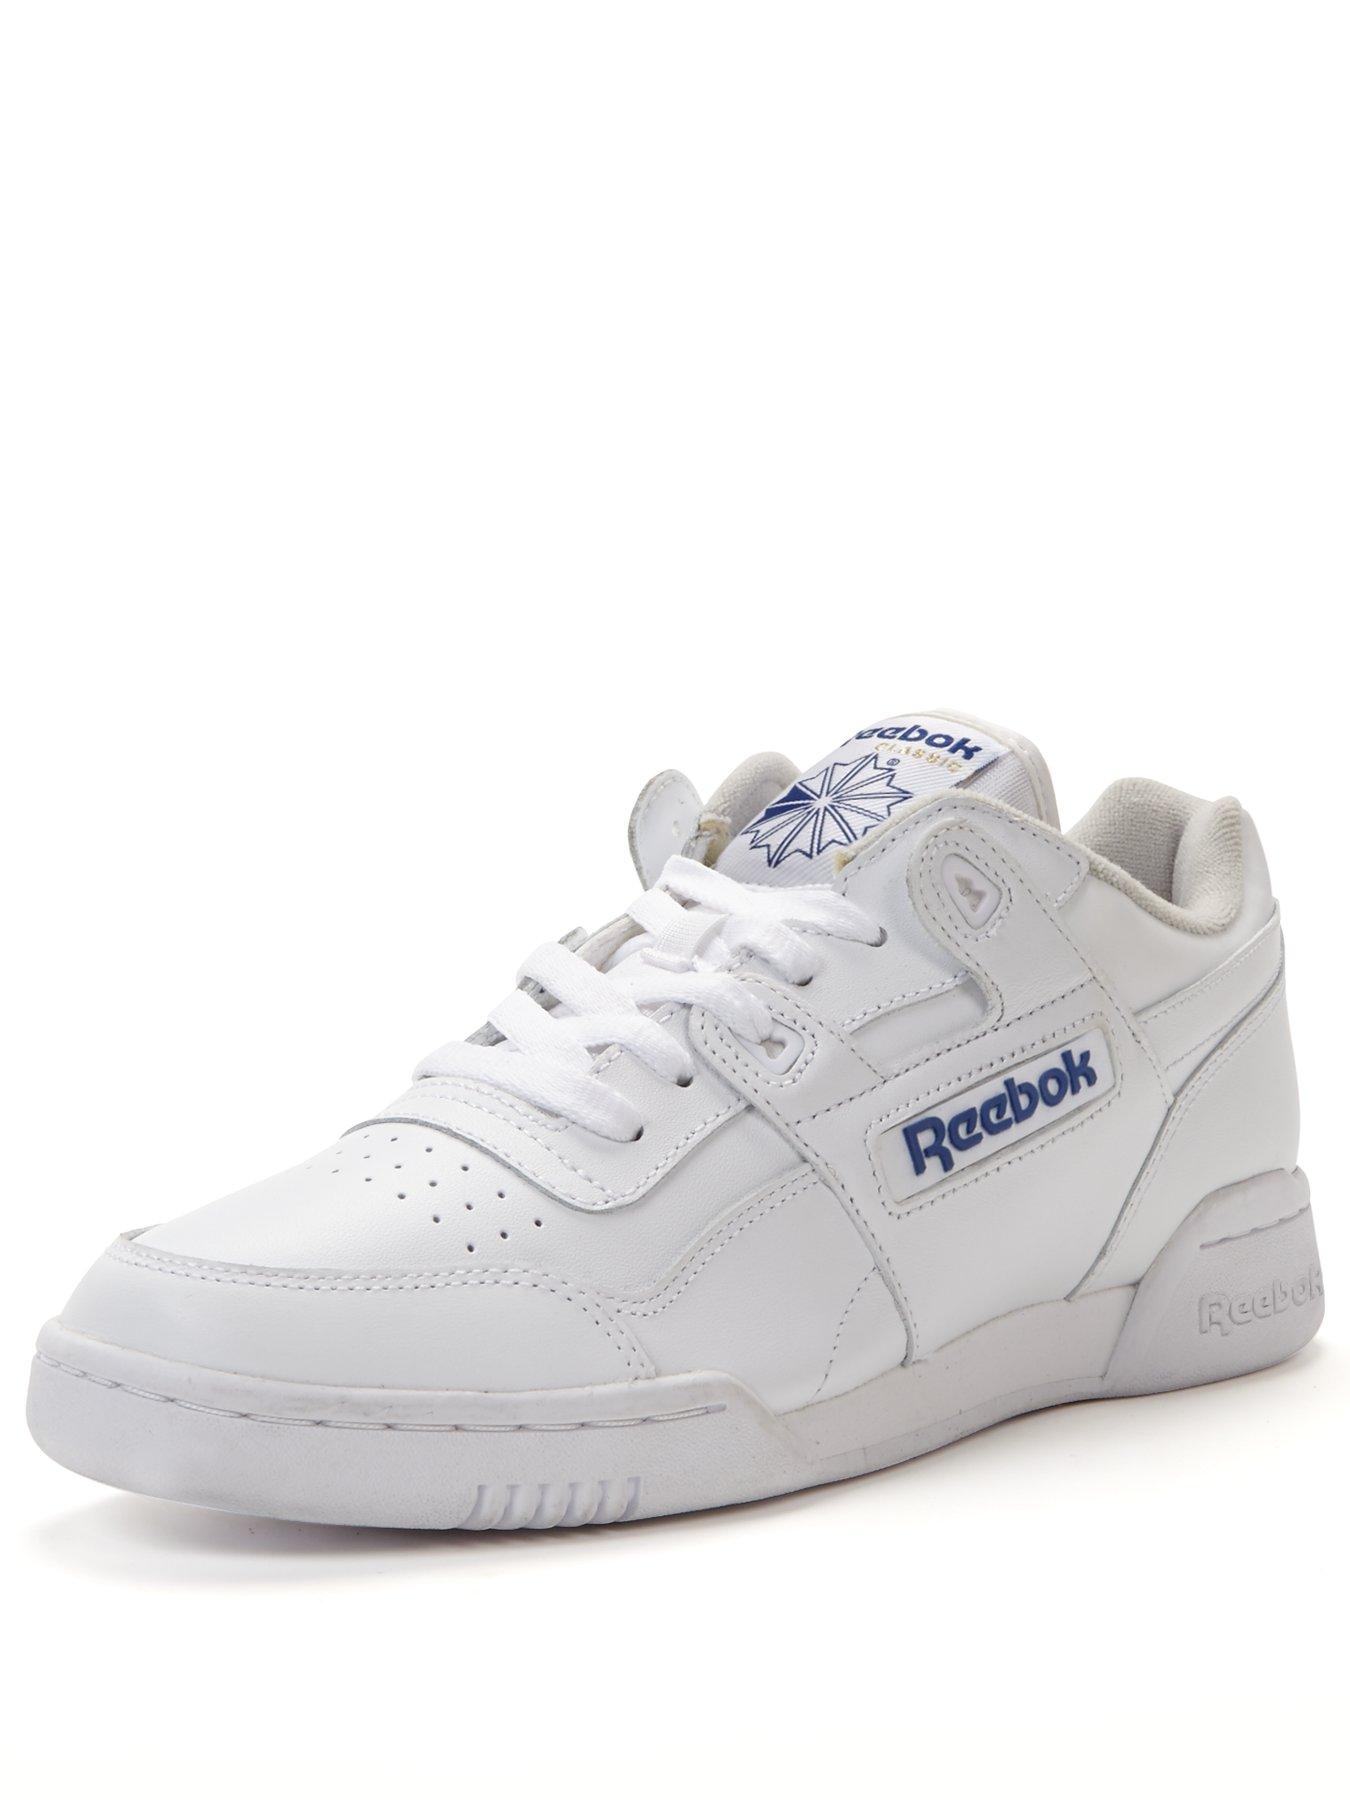 Workout Plus Trainers littlewoods.com